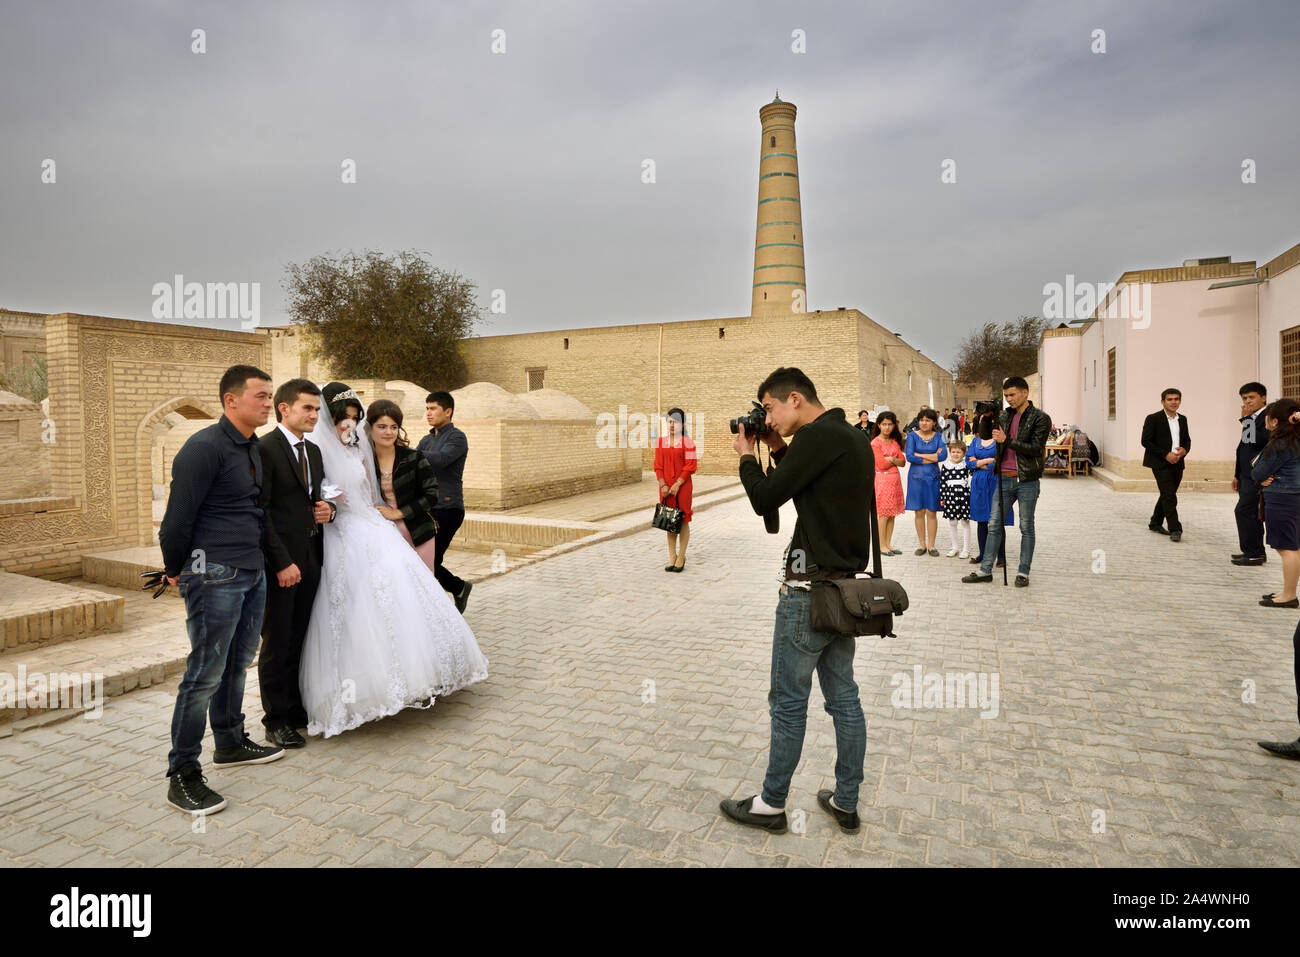 A wedding in the main street of the old town of Khiva, a very popular site for all the festivities in the town. Uzbekistan Stock Photo